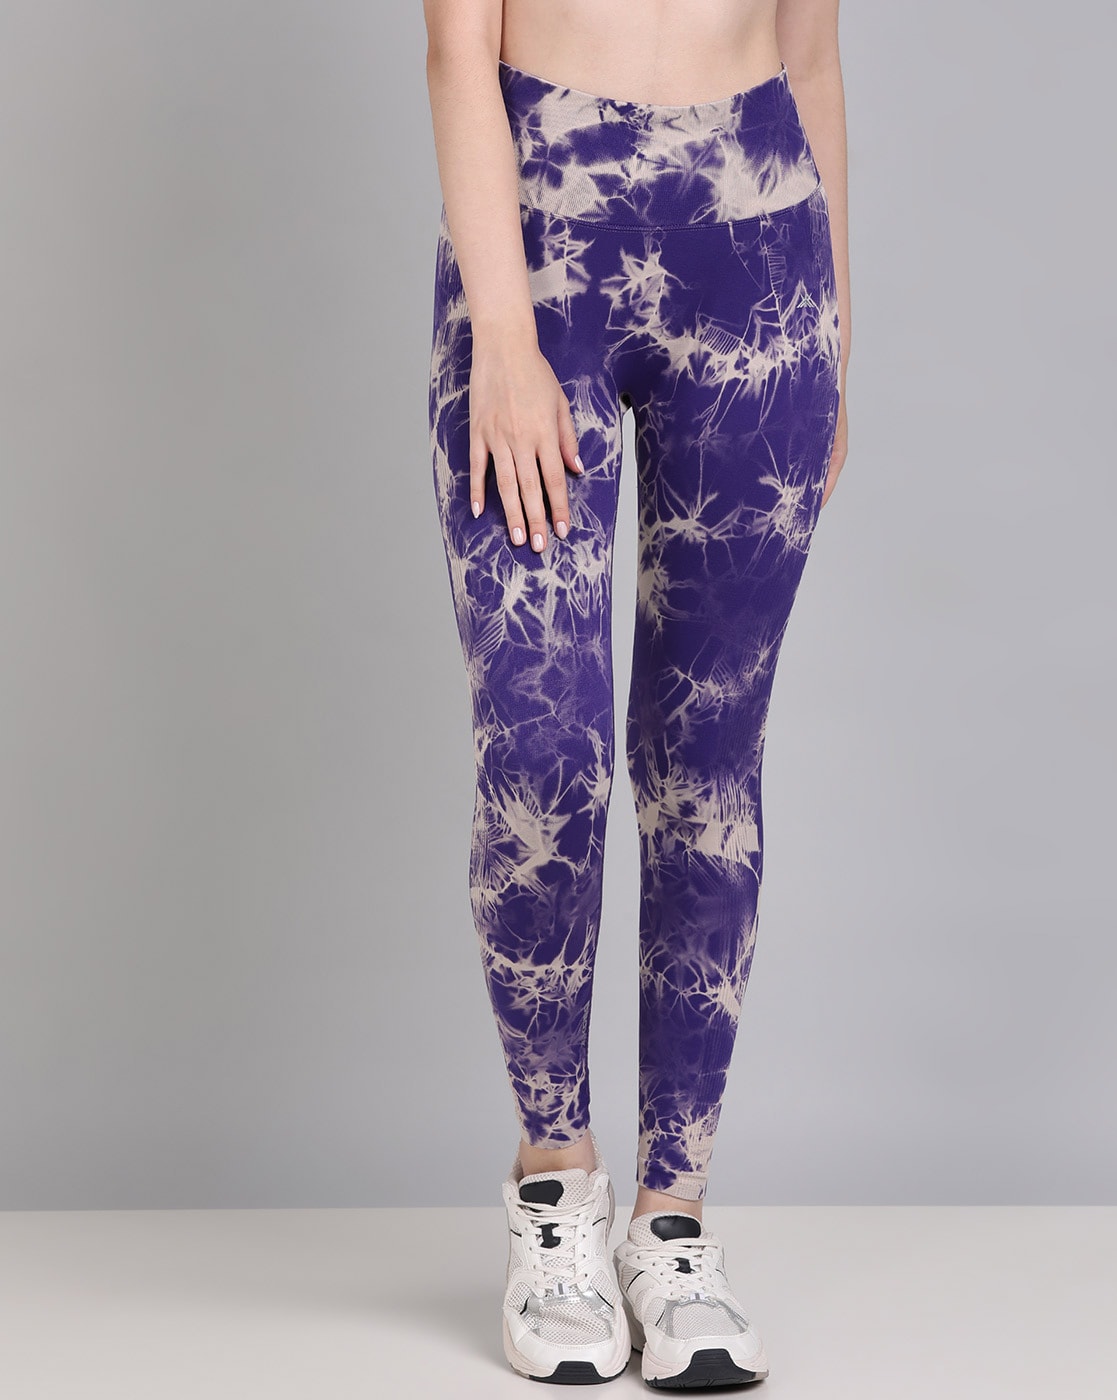 Buy Pastel Tie Dye Workout Leggings Womens High Waist Full or Capri  Athletic Leggings for Workout, Yoga, Running and Sports Lavender Tie Dye  Online in India 